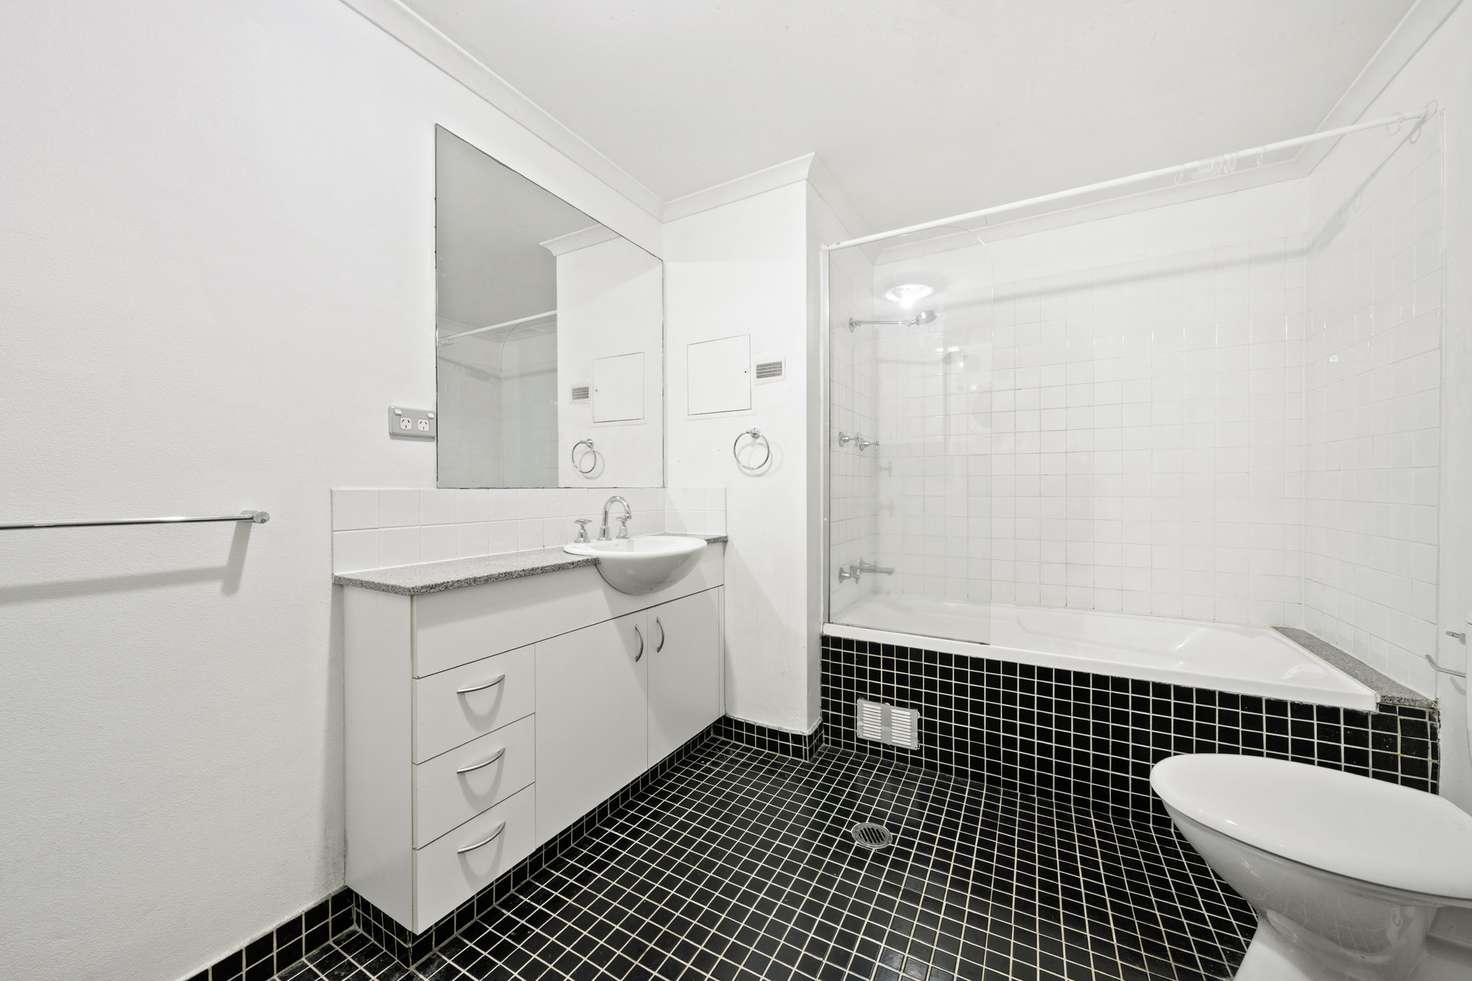 Main view of Homely apartment listing, 1207/242 Elizabeth Street, Surry Hills NSW 2010